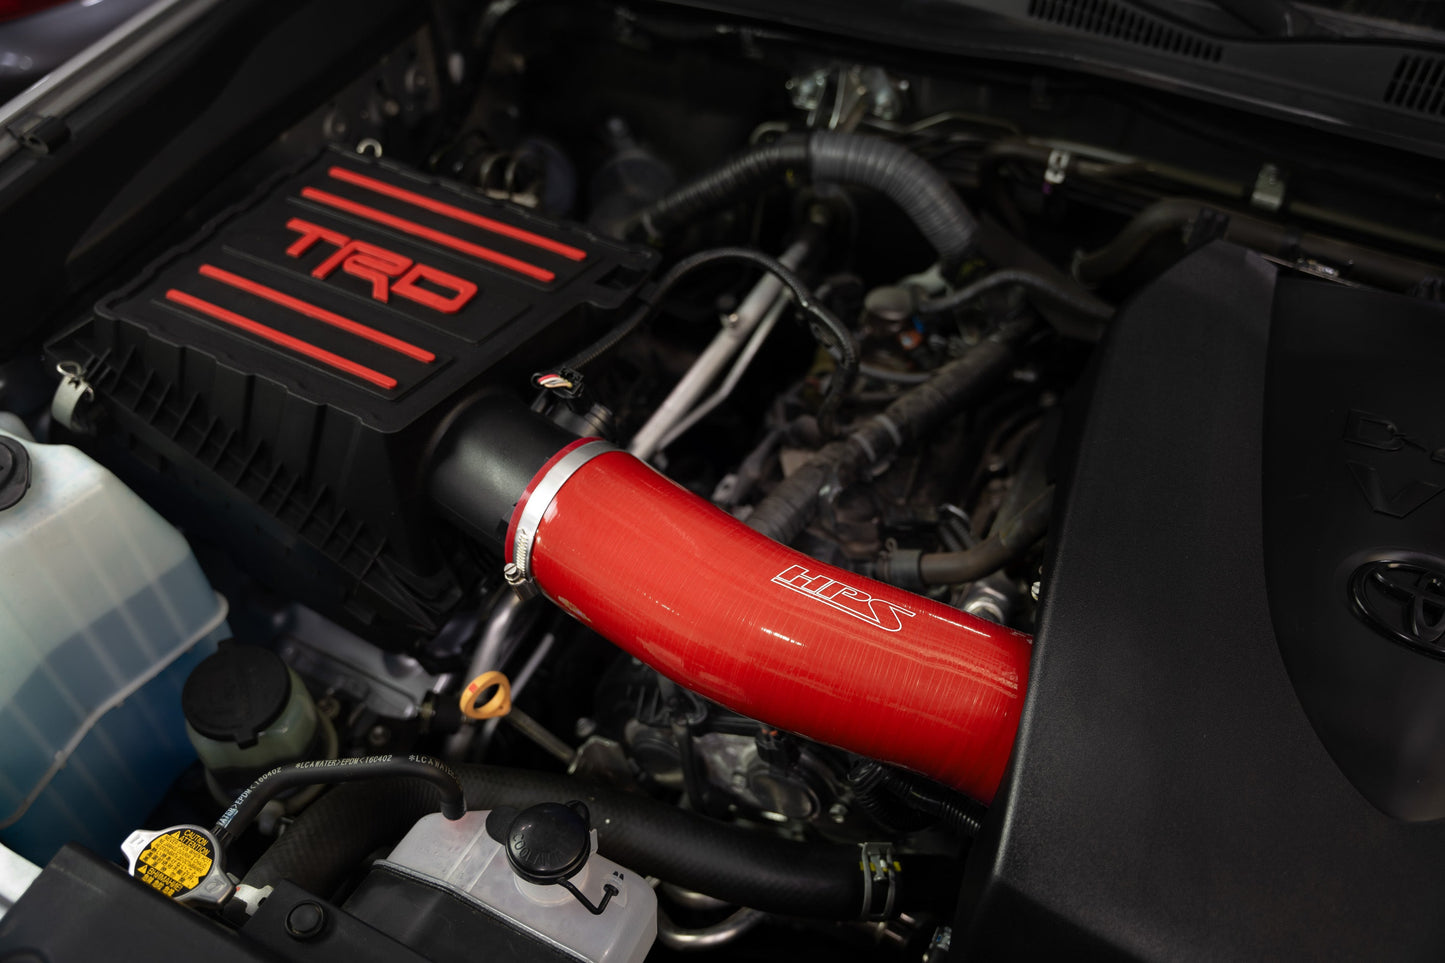 HPS Red Silicone Air Intake Kit with Drop in Air Filter, fits Toyota 2016-2022 Tacoma 3.5L V6 equipped with TRD Performance Intake - Part # PTR03-35160, 827-723R